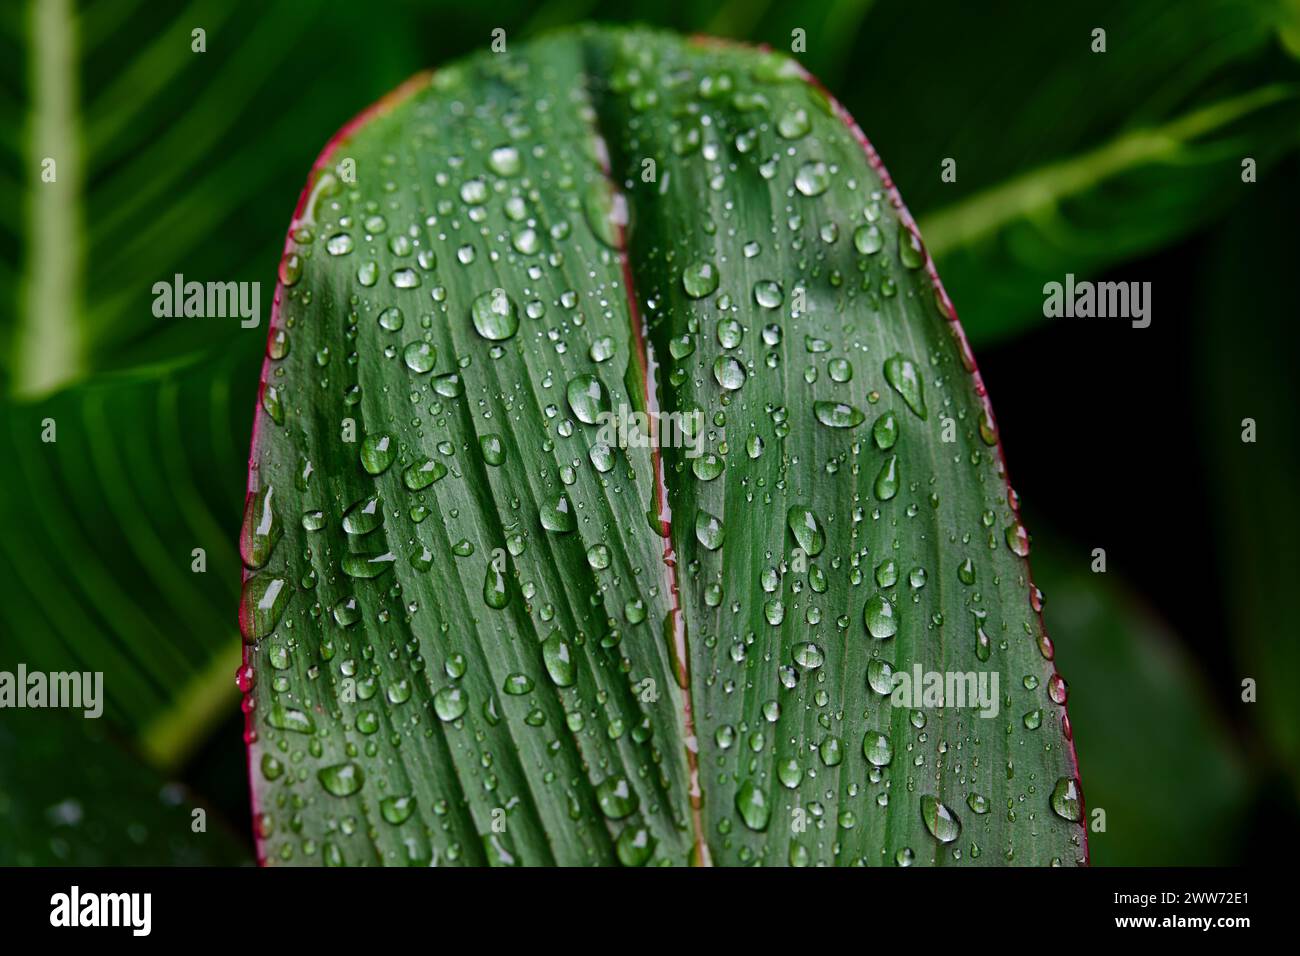 Close-up of raindrops on leaves Stock Photo